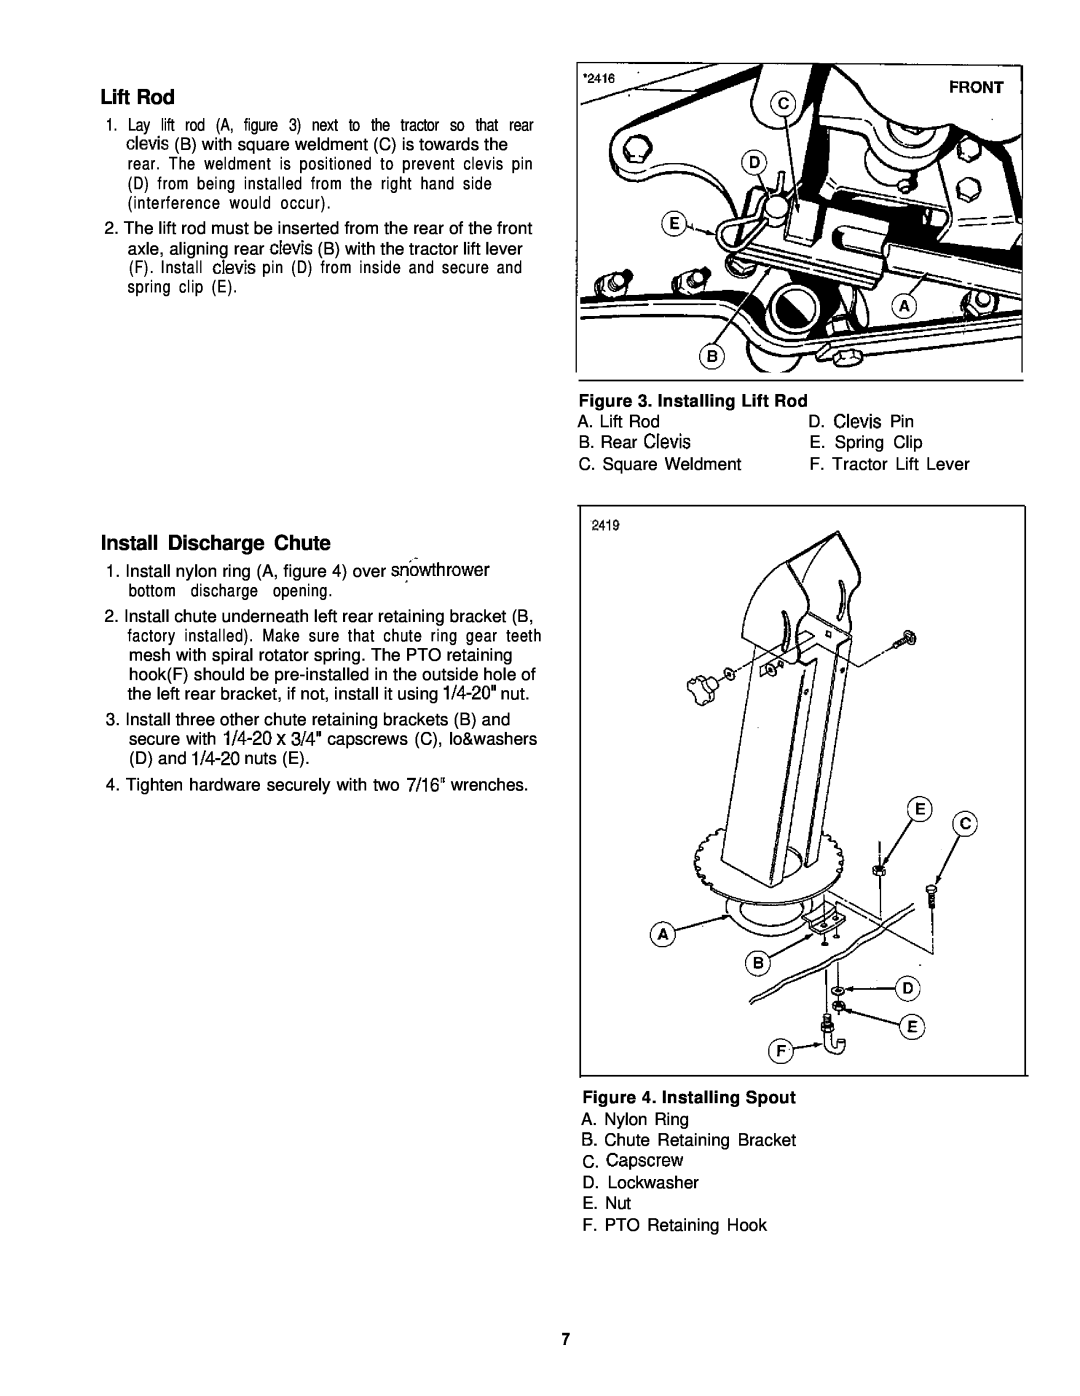 Simplicity 1692243, 1692244 manual Install Discharge Chute, Installing Lift Rod, Installing Spout 